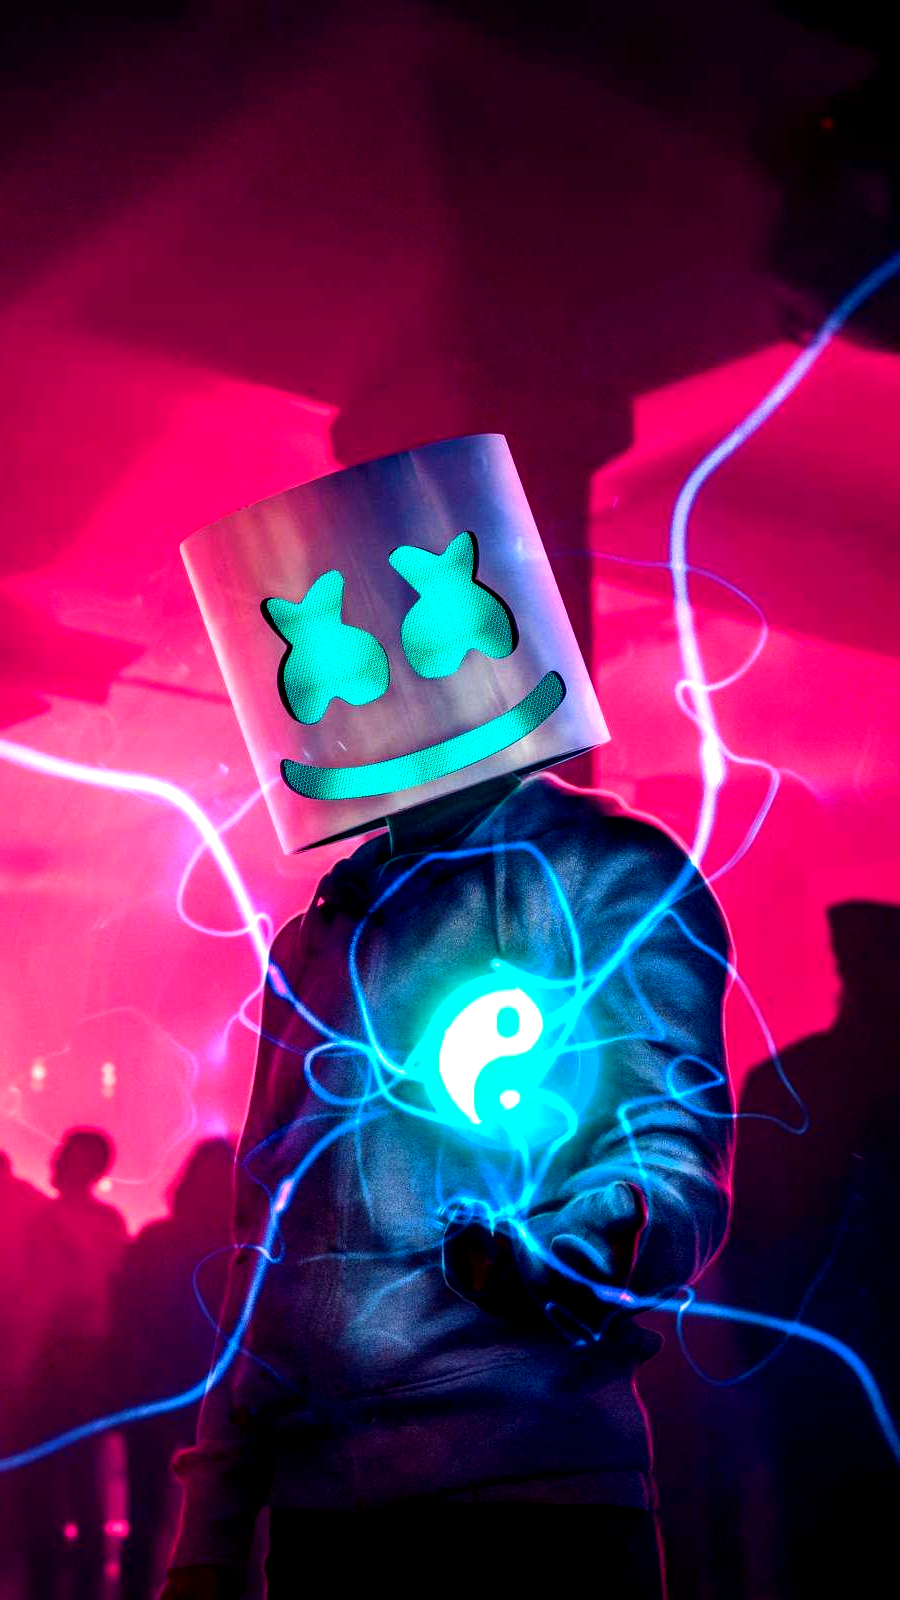 Marshmello Face iPhone Wallpaper Phone wallpaper images 900x1600